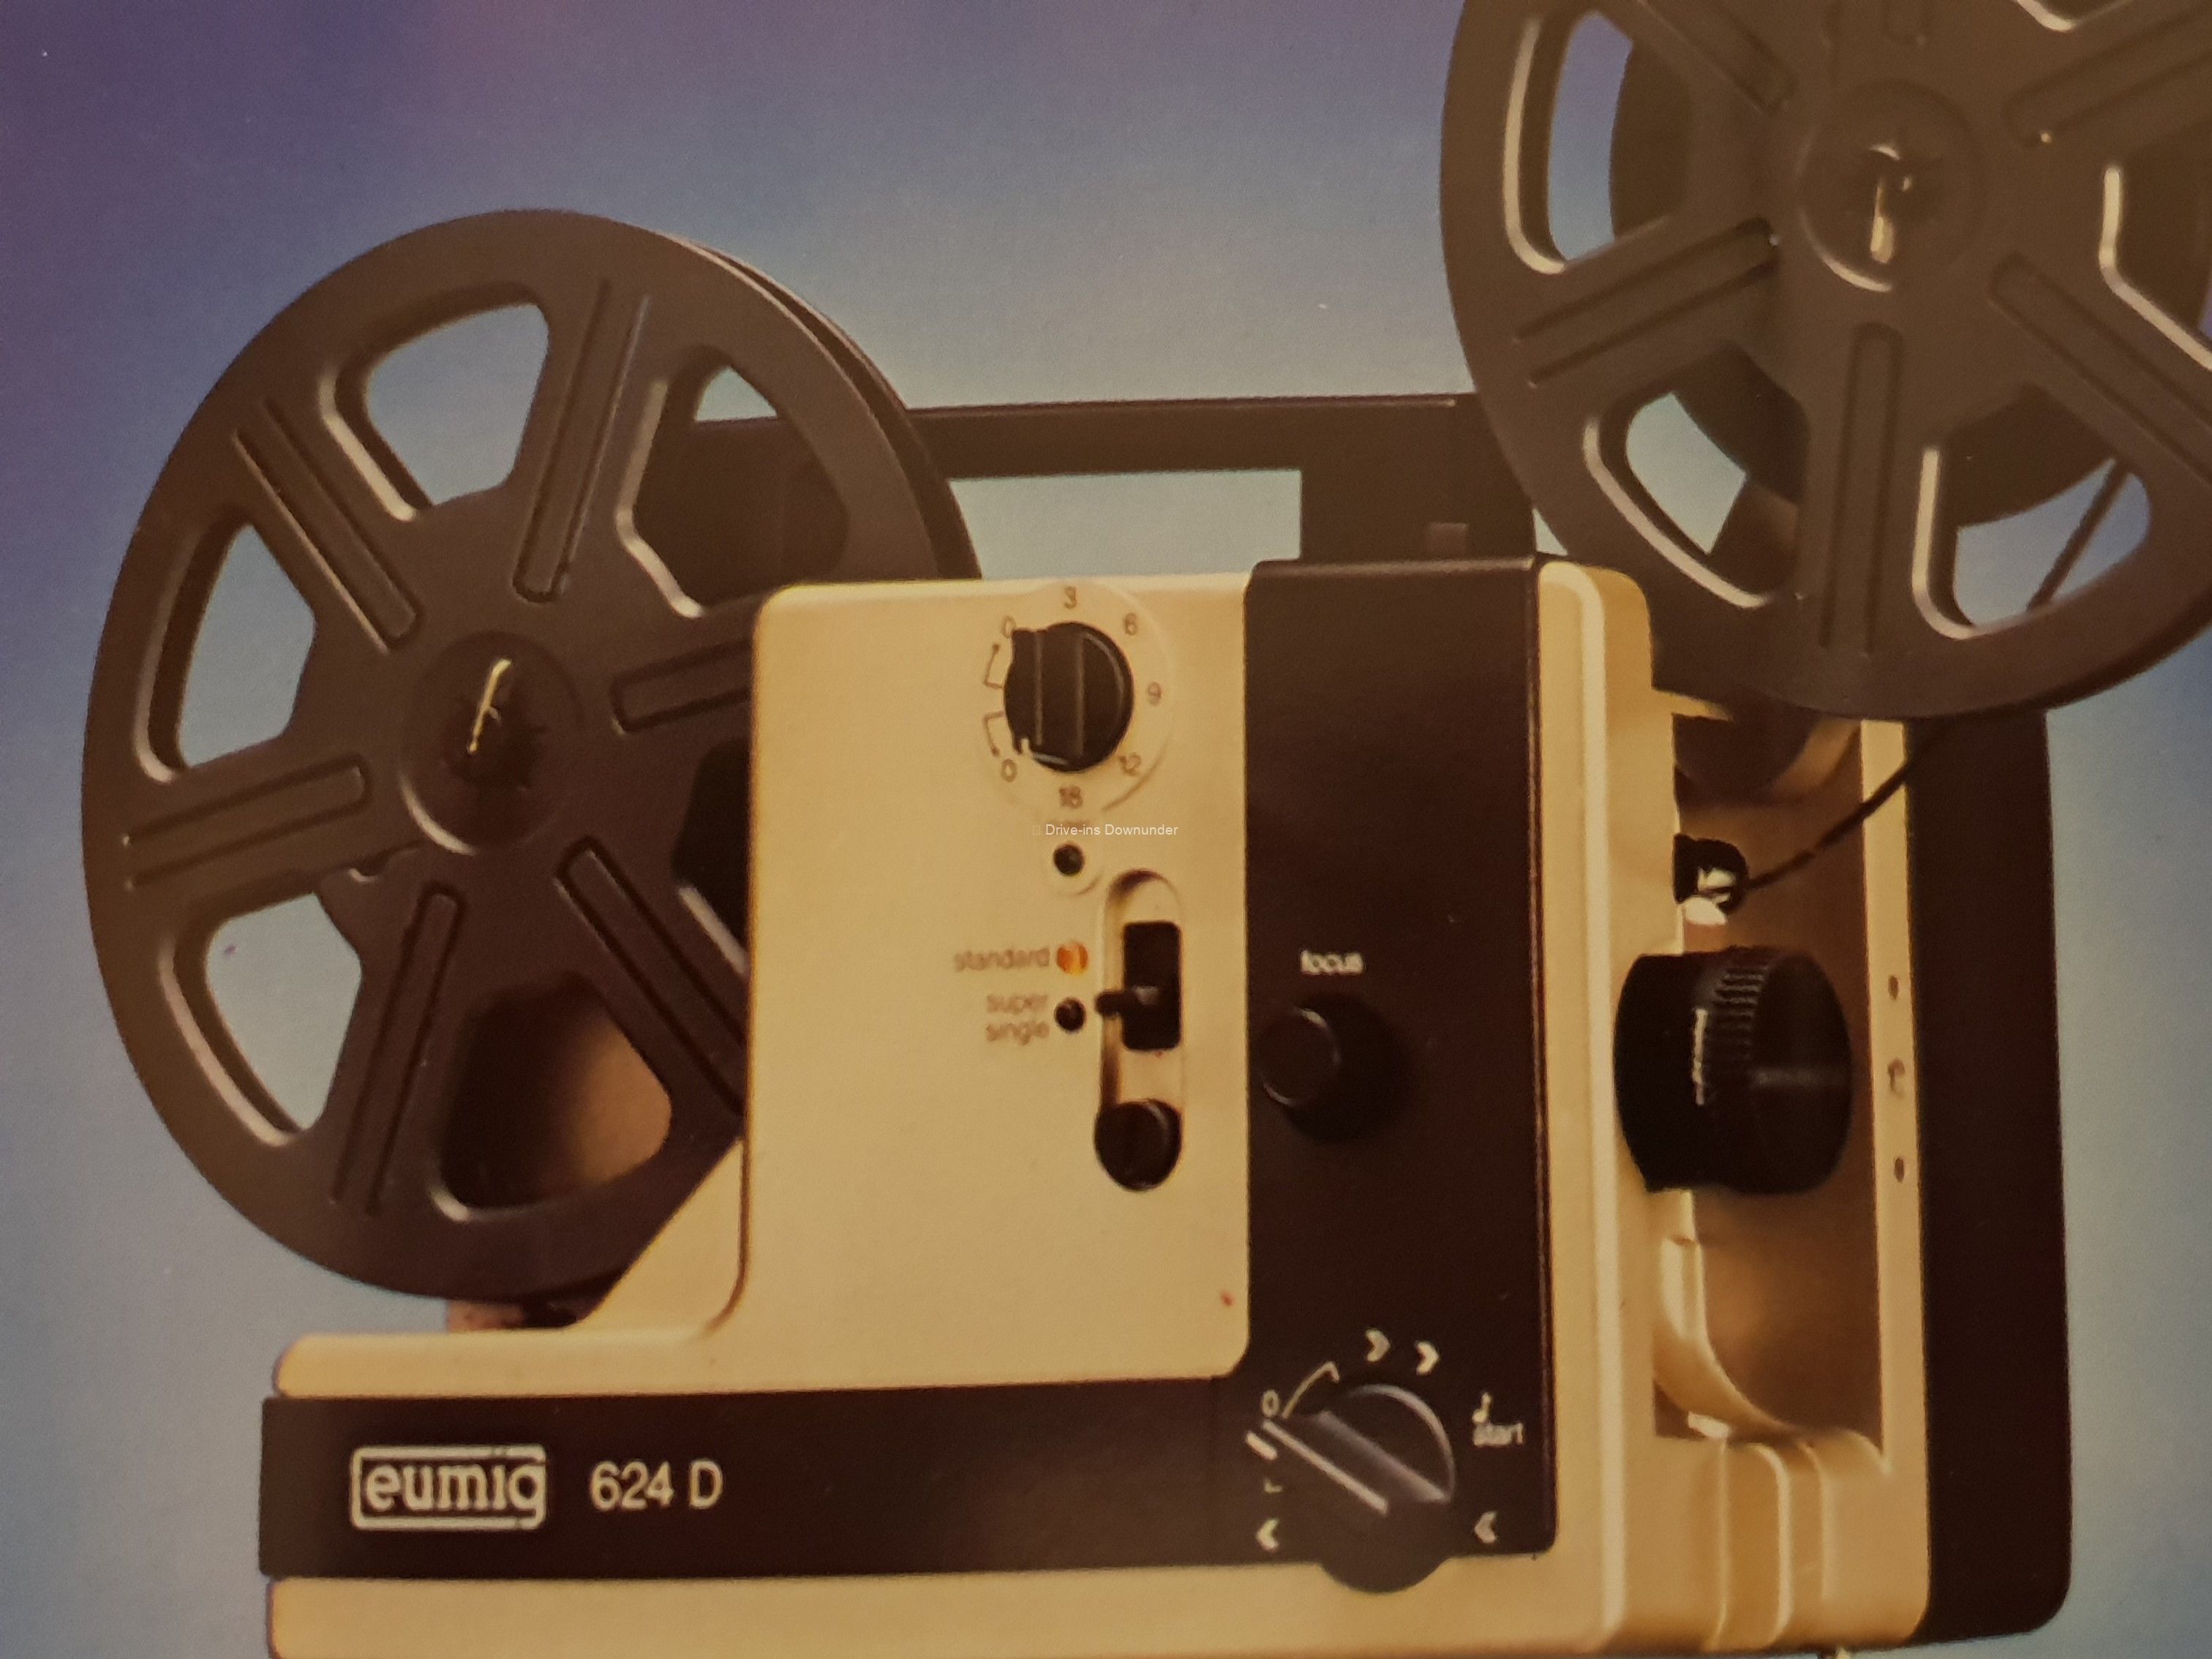 How To Buy A Super 8 Movie Projector – Drive-Ins Downunder